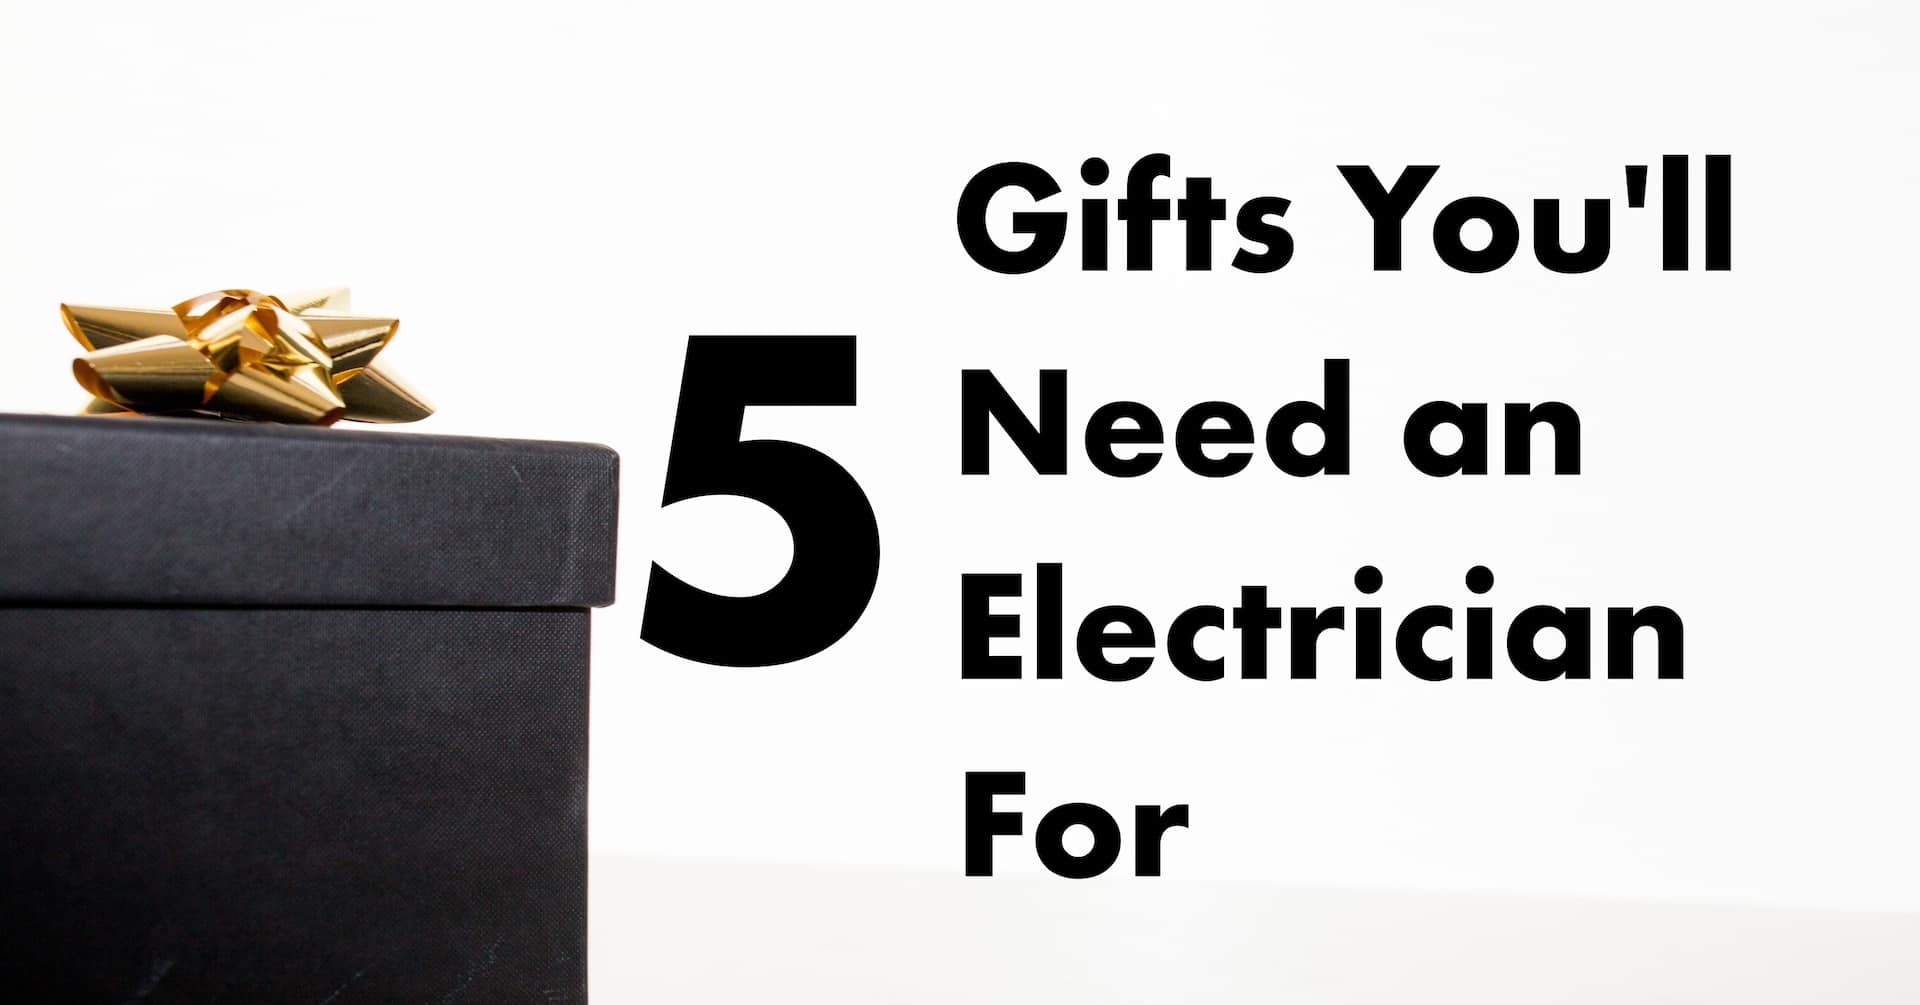 5 gifts you'll need an electrician for